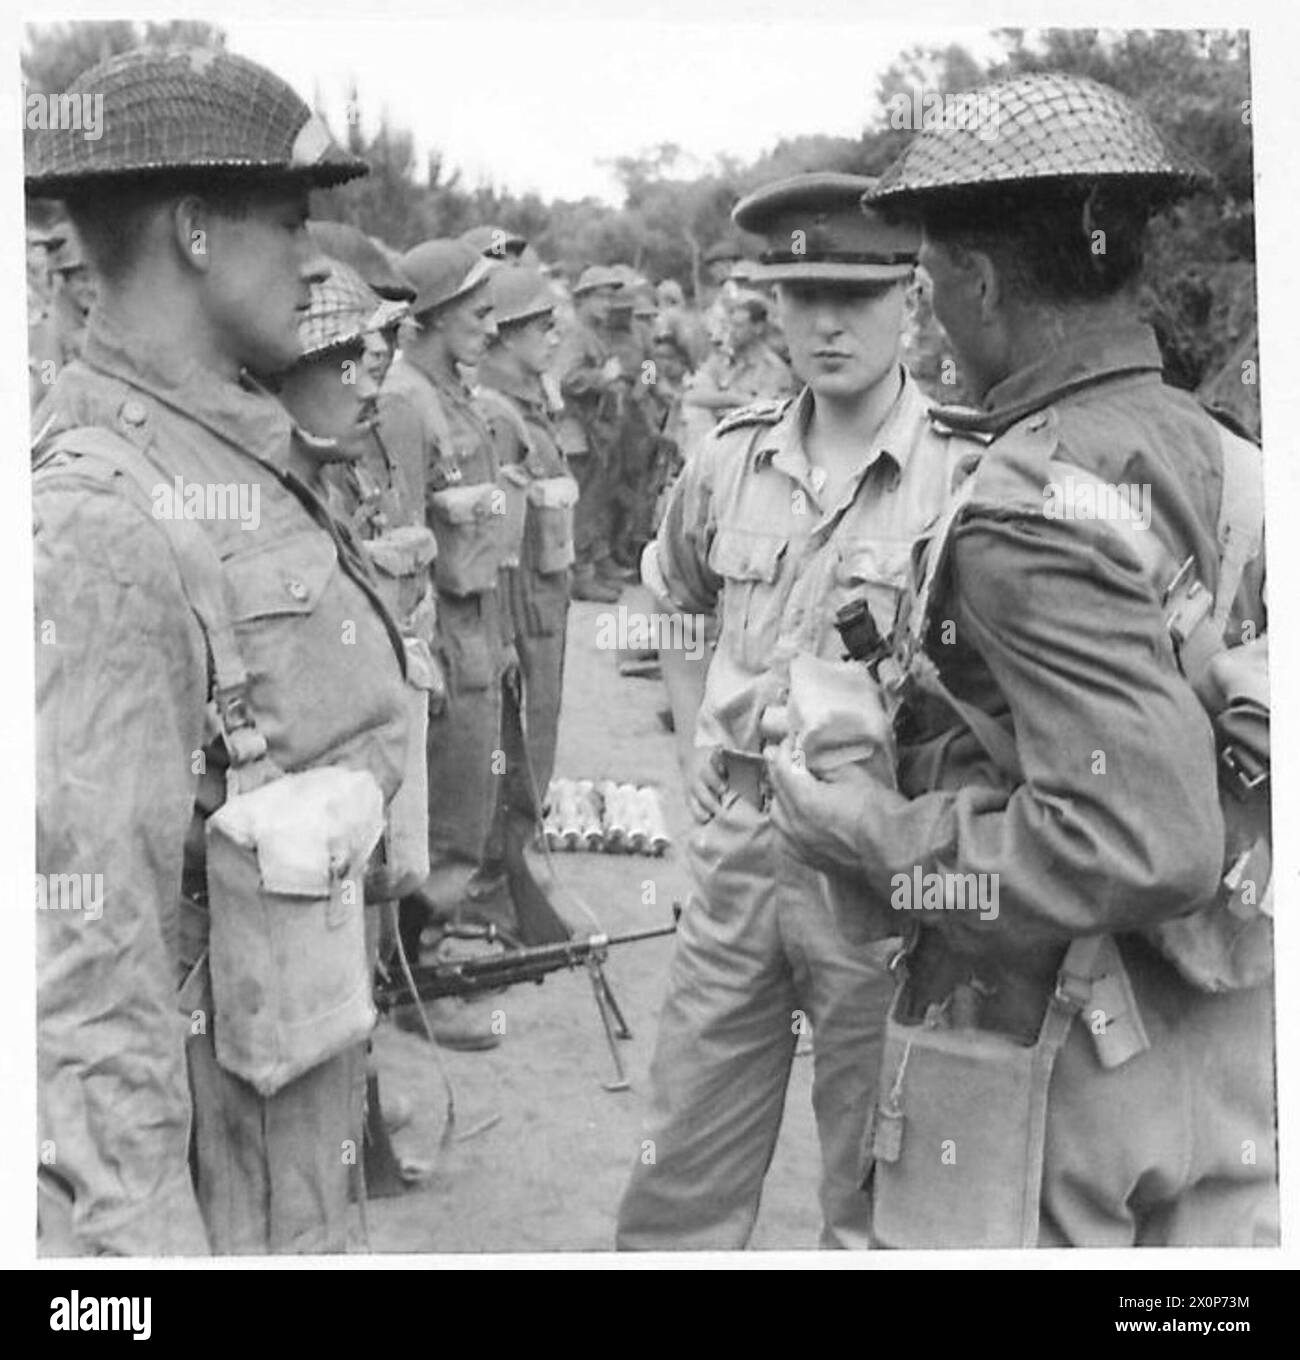 FIFTH ARMY : ANZIO OFFENSIVE - Before moving off, the Platoon Commander inspects his men to ensure that all correct equipment is assembled. Left to right:- L/Cpl. T. Brown of 27 Davidson Street, Felling, Co.Durham Lieut. C.W. Newton of Little Adstock, Adstock, Winslow, Bucks Sgt. J. Calder of 146 Hawthorne Road,Ashington, Northumberland. Photographic negative , British Army Stock Photo